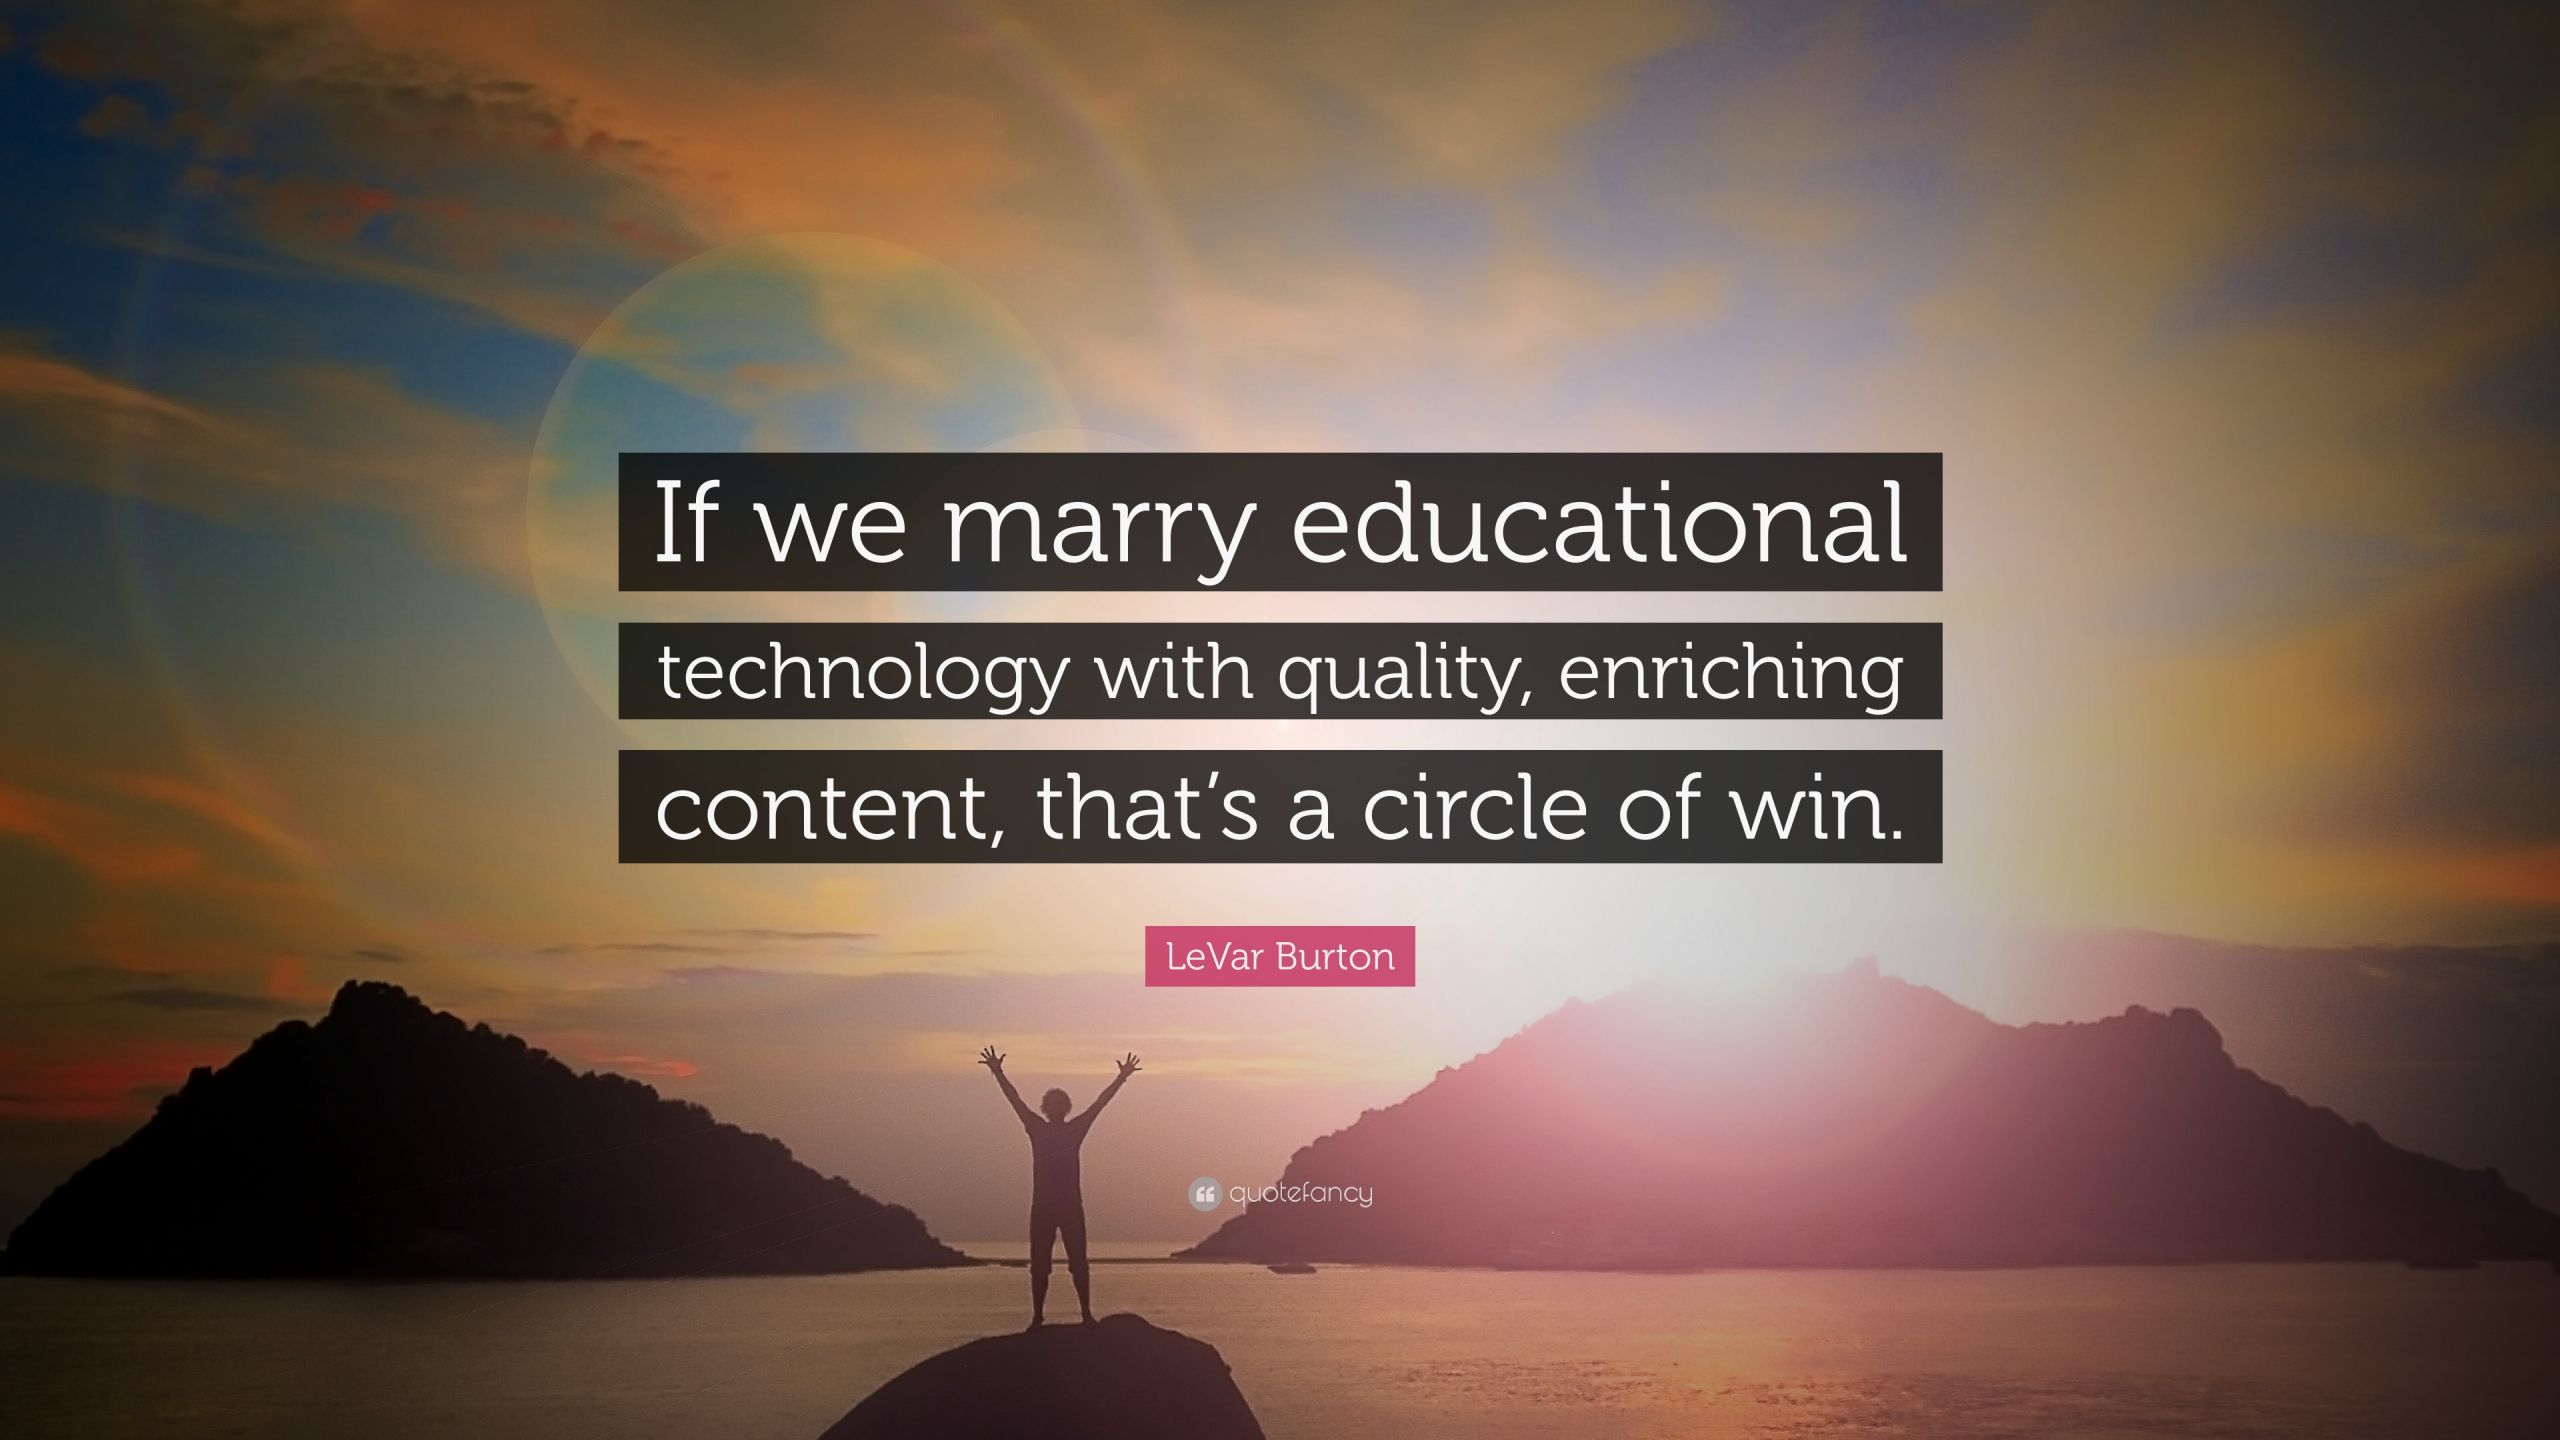 Quote About Technology In Education
 LeVar Burton Quote “If we marry educational technology